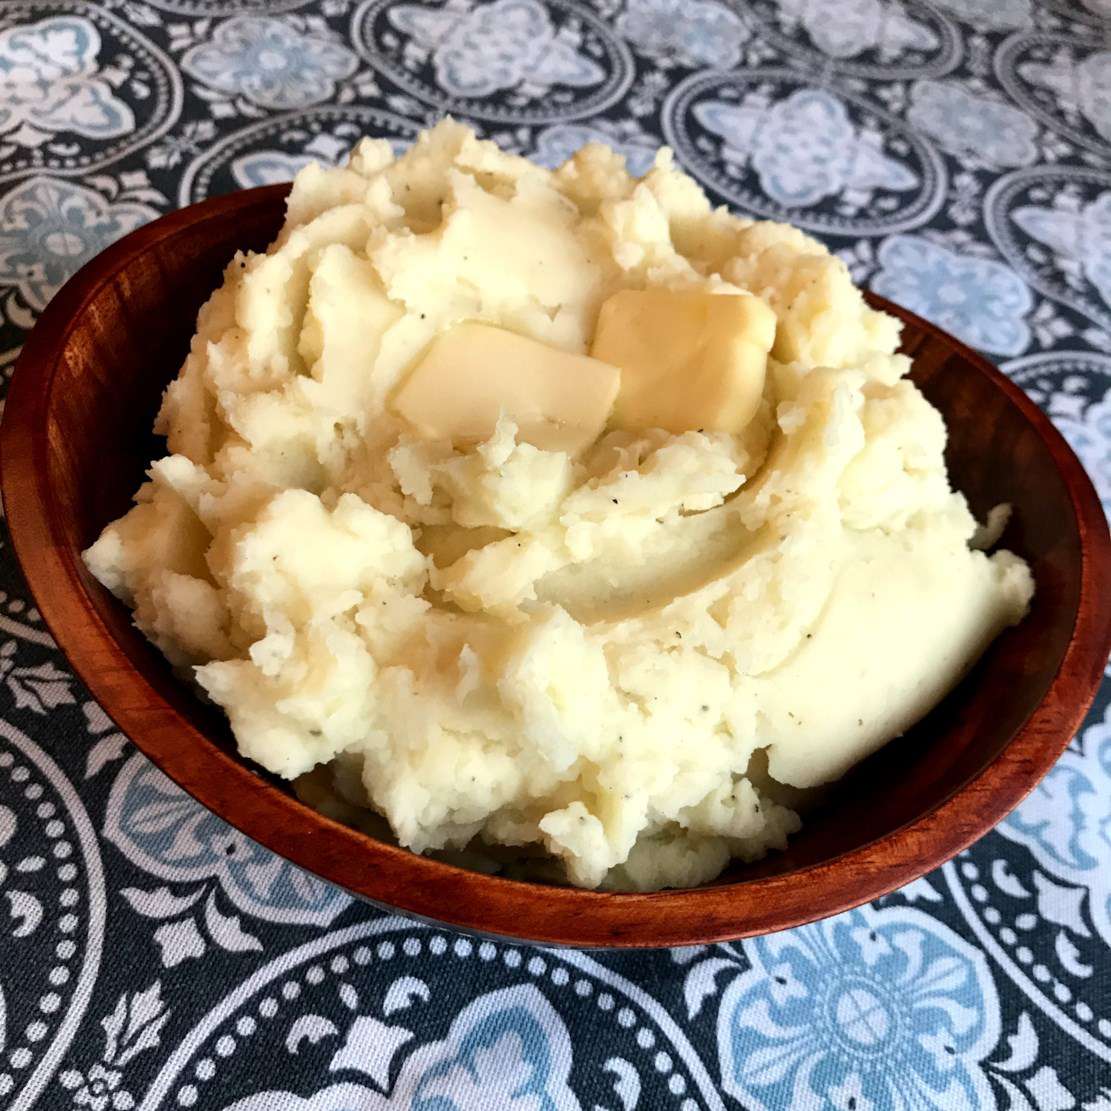 a wooden bowl of mashed potatoes with two pats of butter